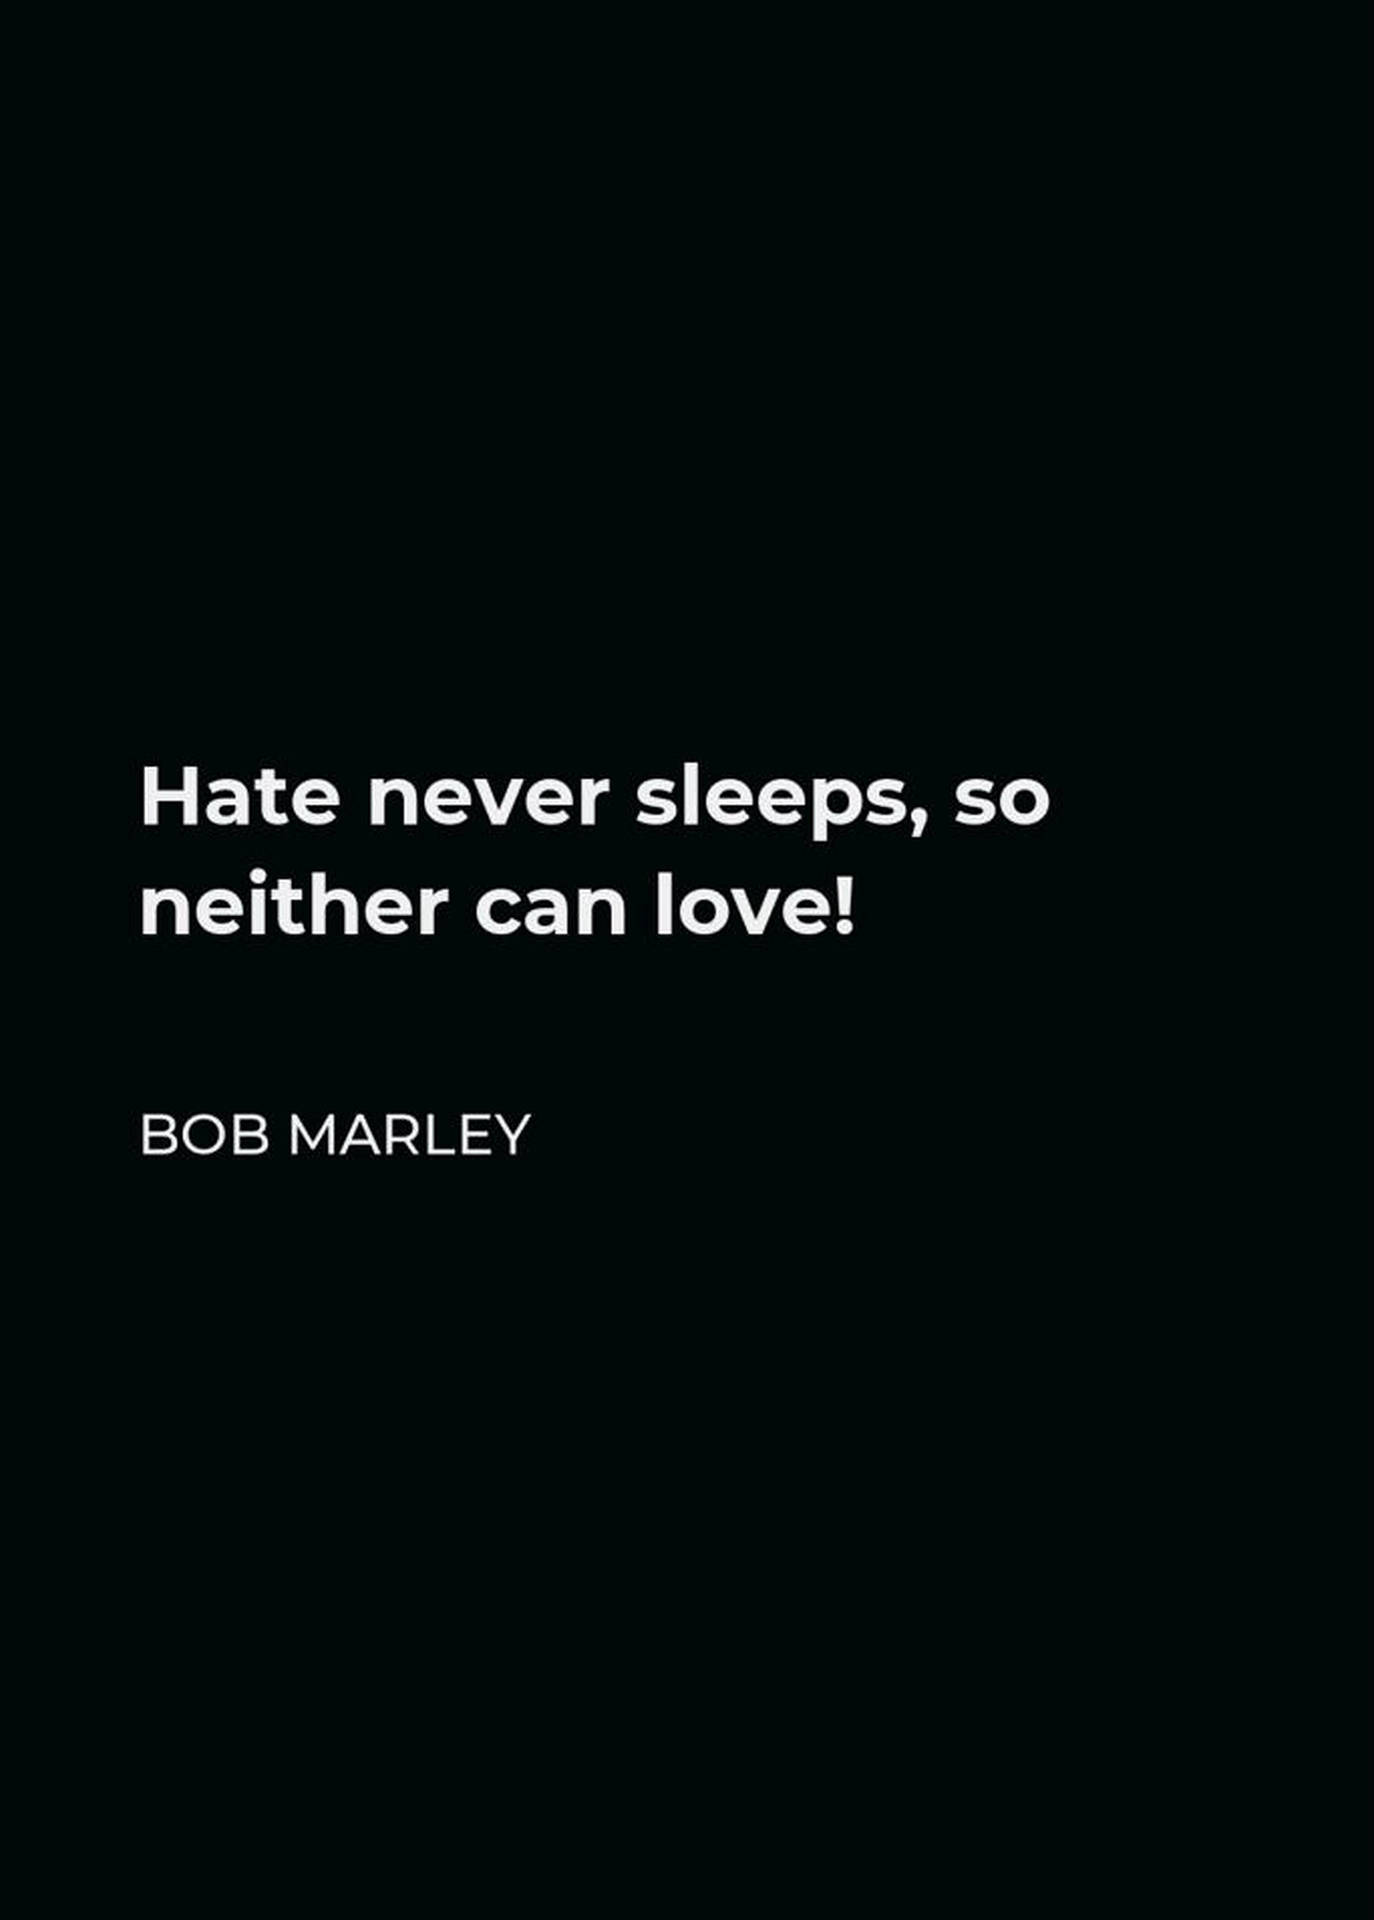 Bob Marley Love Quotes Background